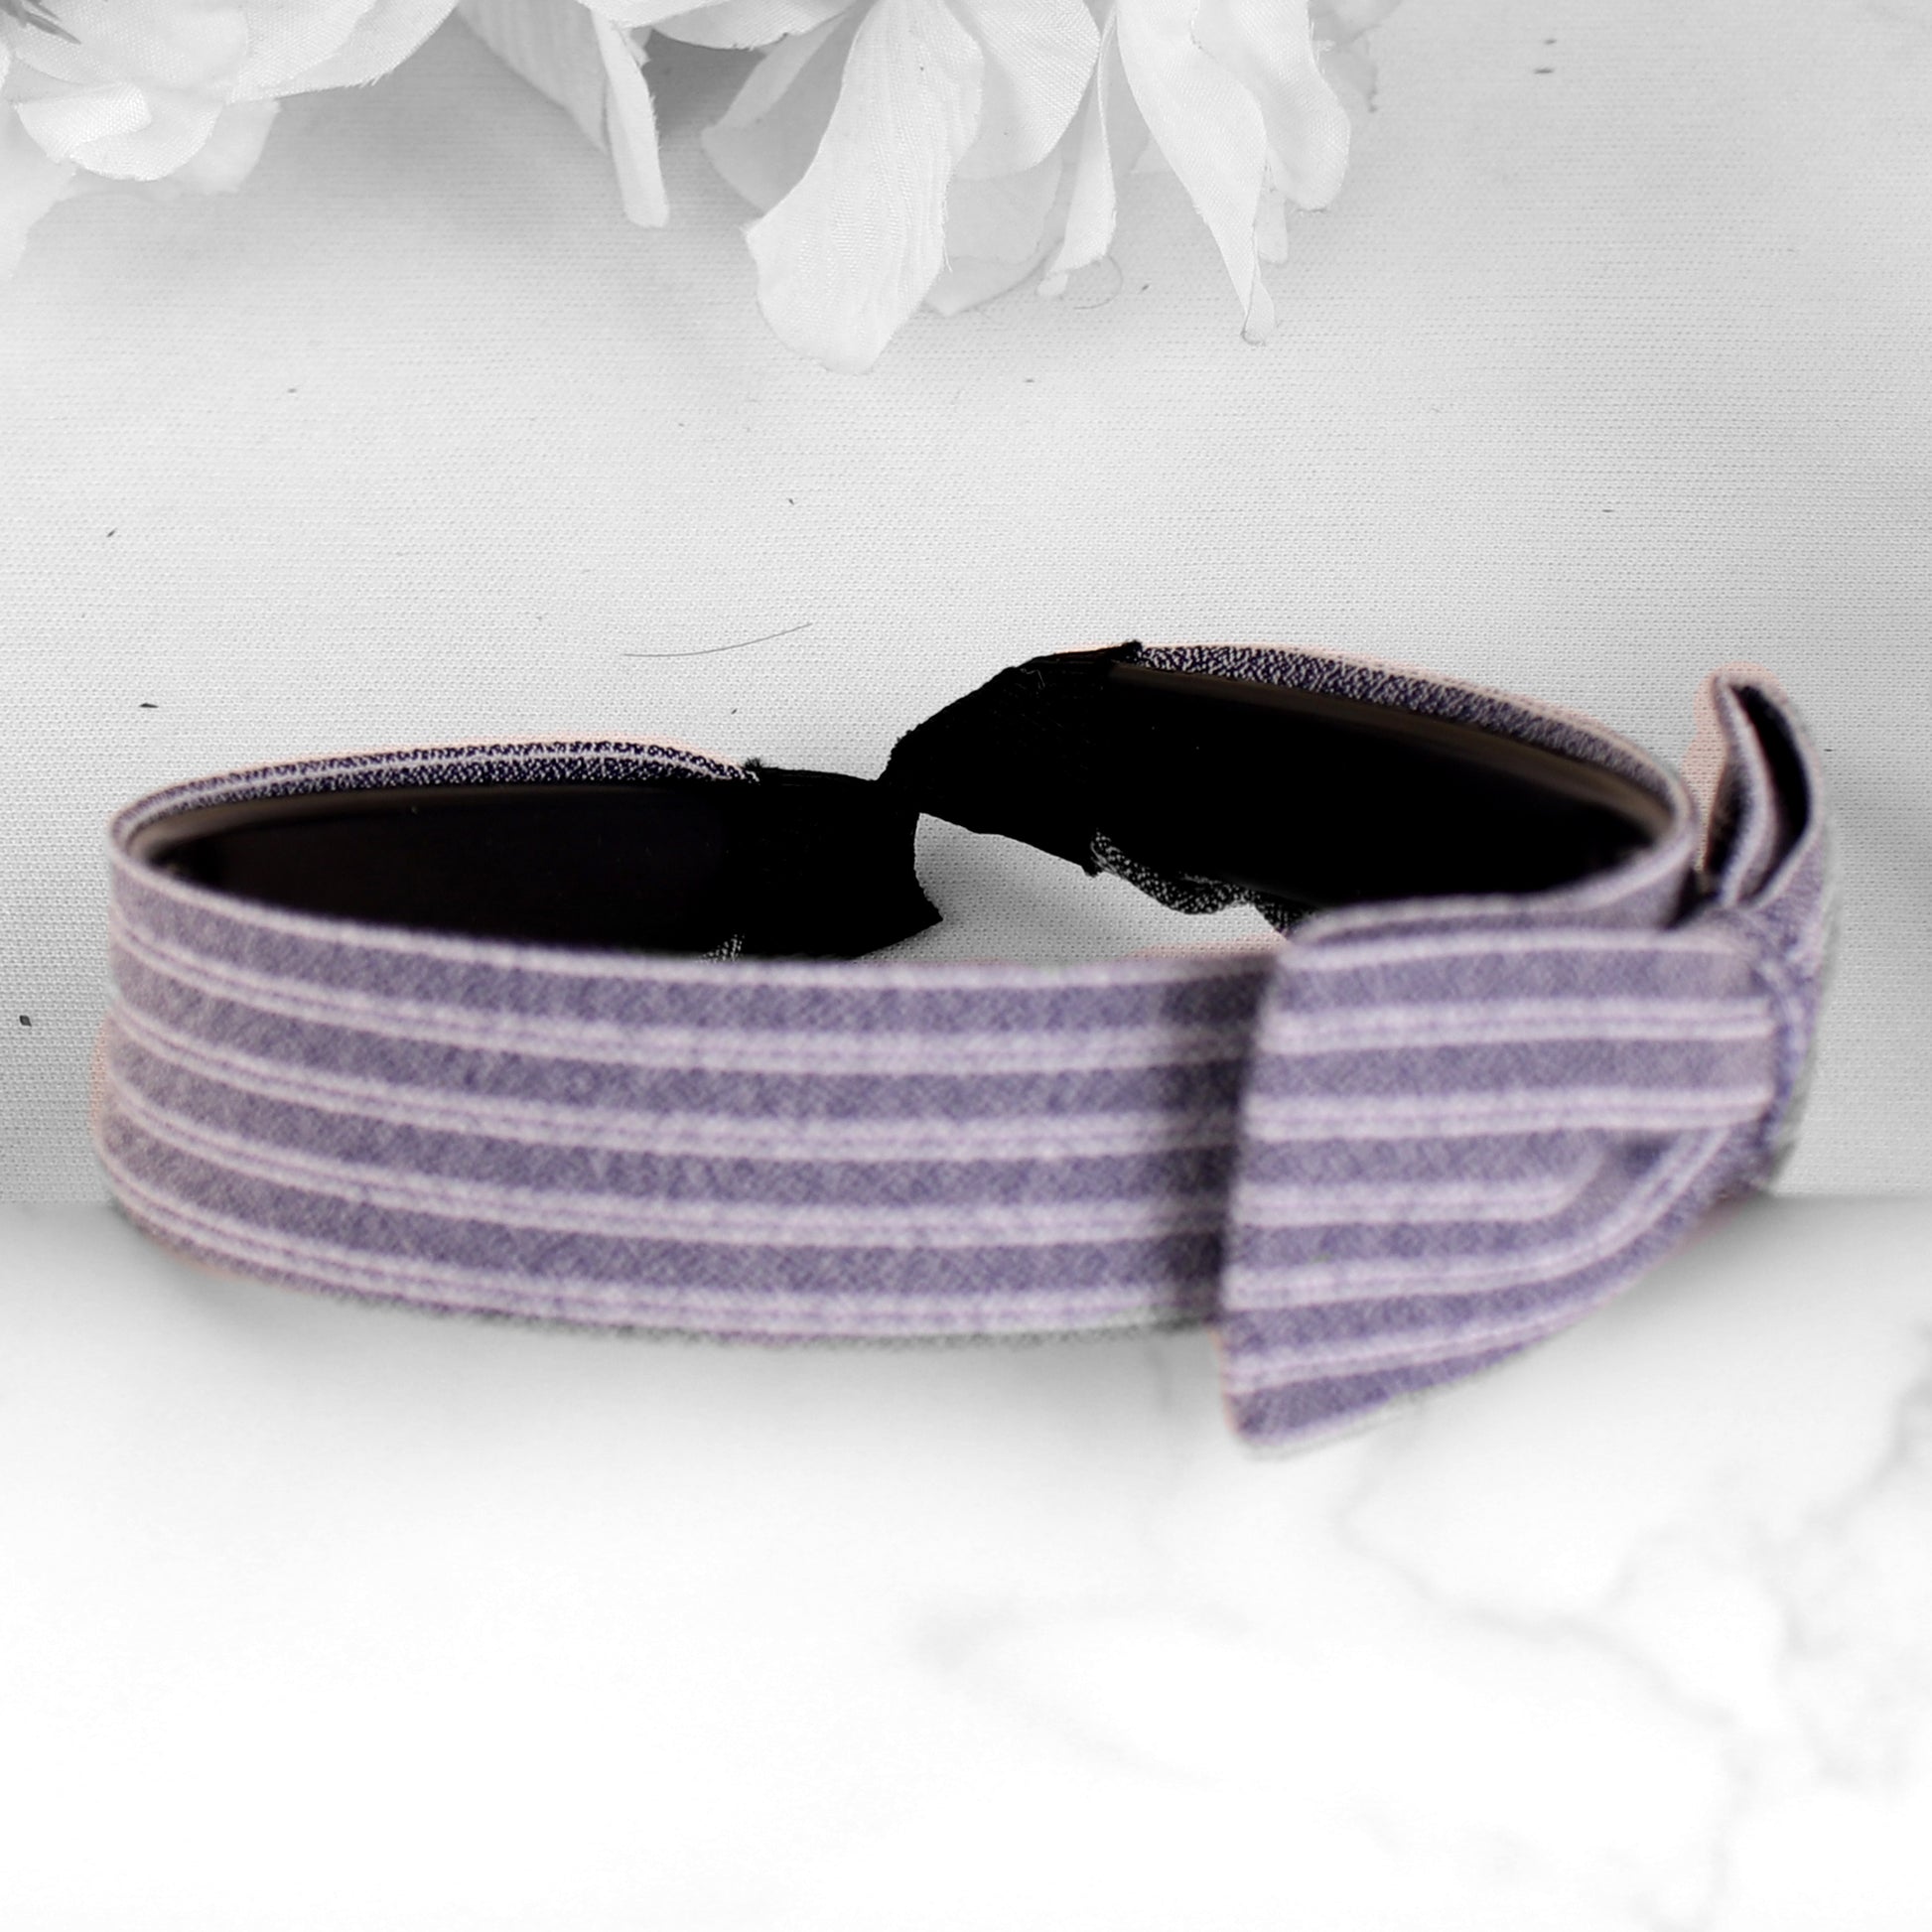 HairBand,Bewitching Bow Hair Band in Blue - Cippele Multi Store